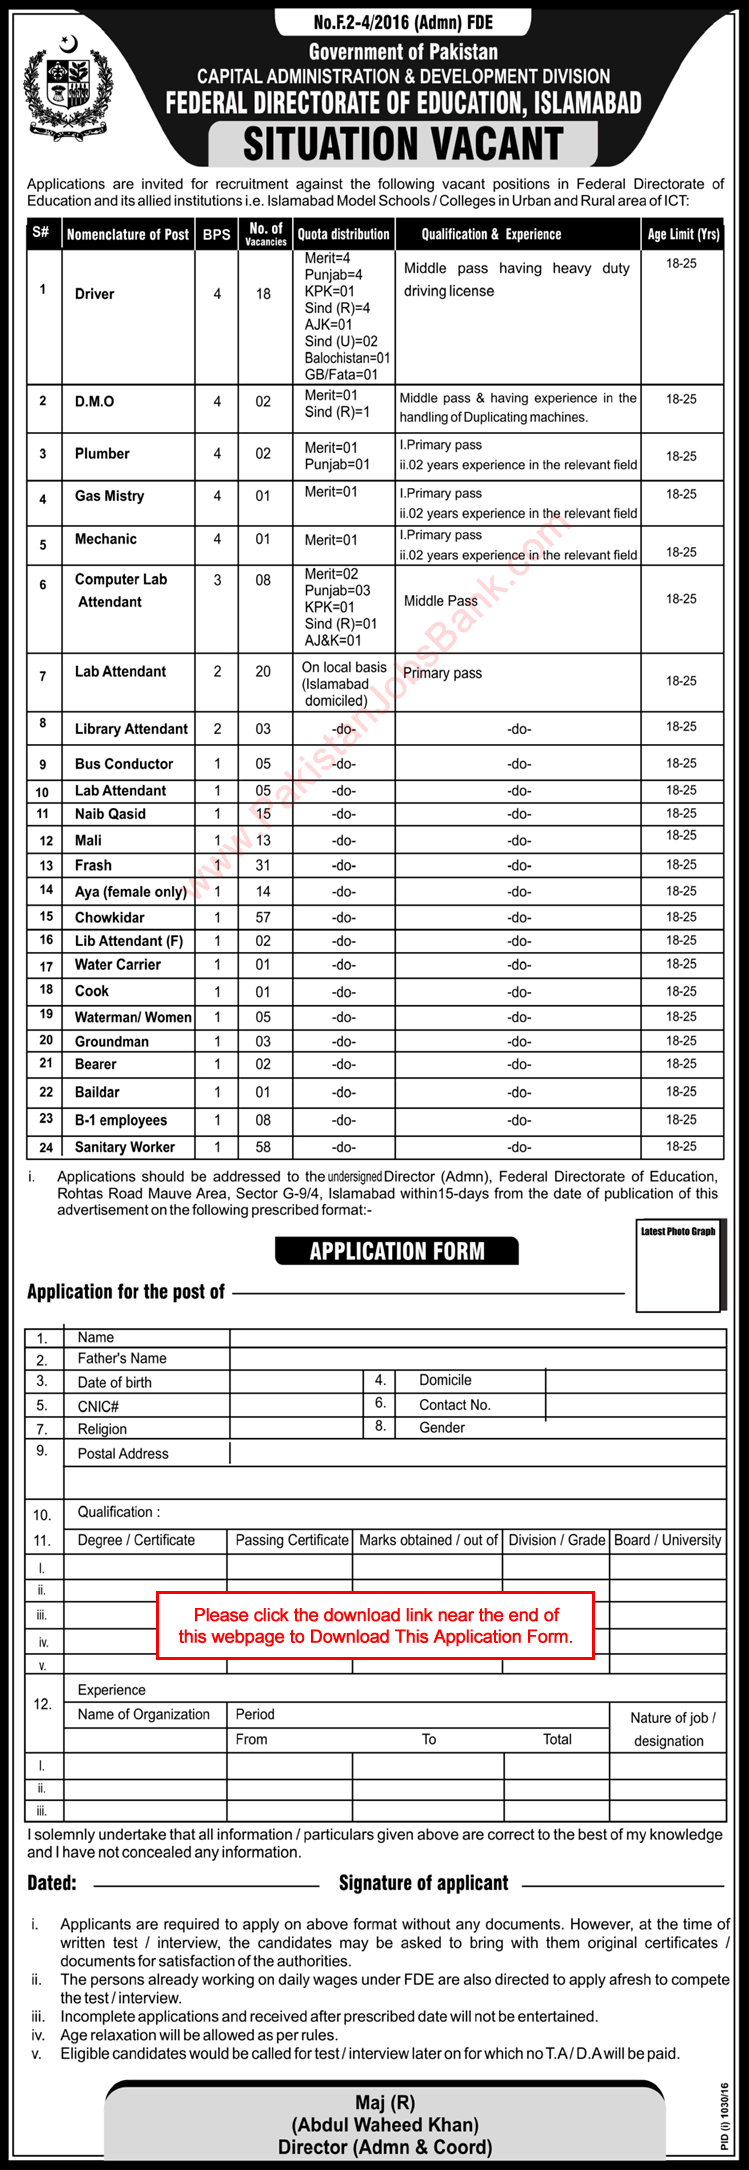 Federal Directorate of Education Islamabad Jobs August 2016 September Application Form Download Latest